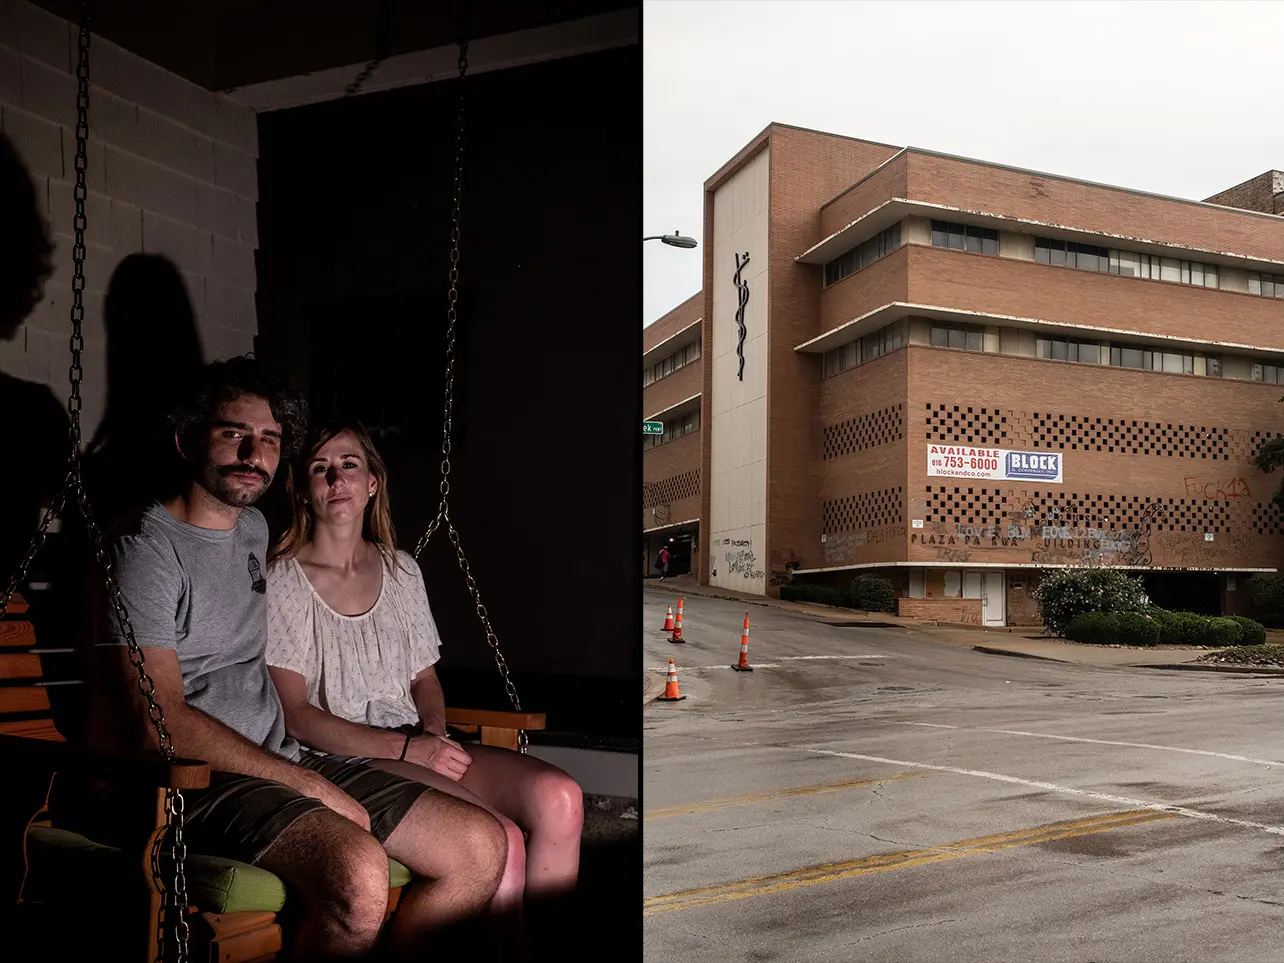 Left: A portrait of Sean Stearns and another person. Right: A building and a street.